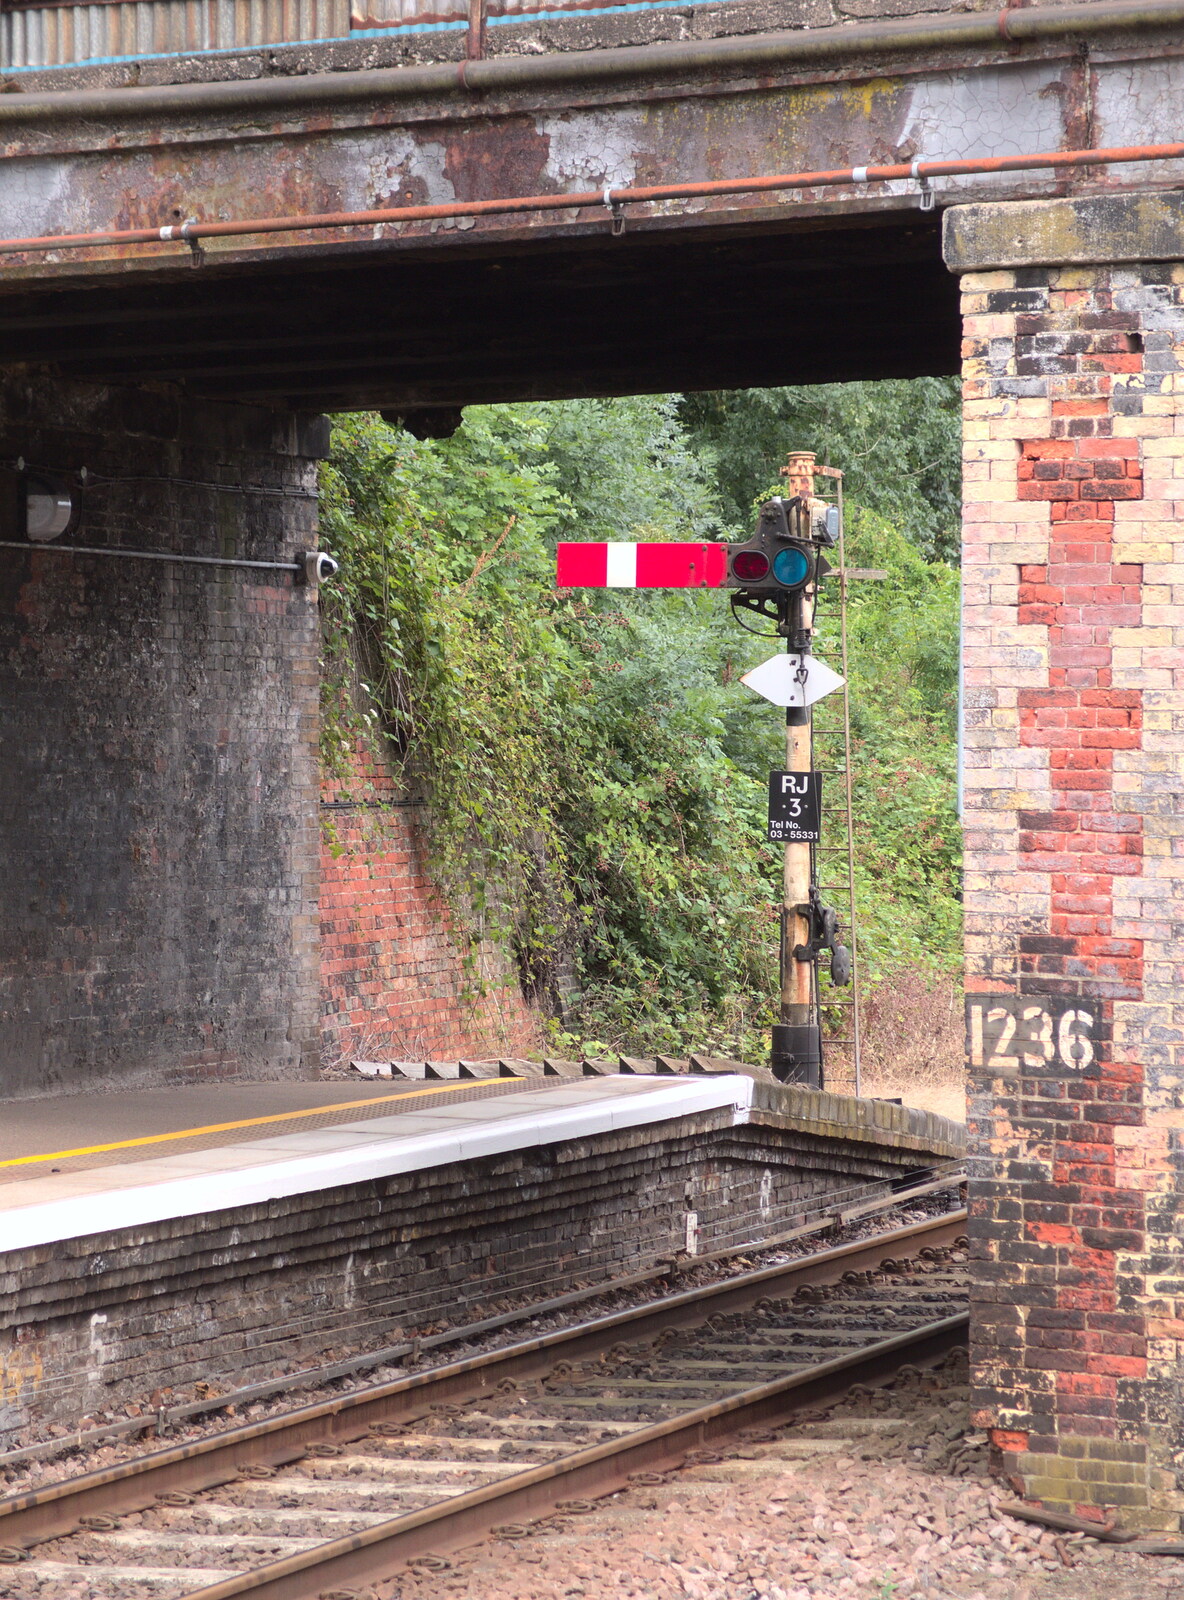 A view of the vintage signal through the bridge from The Humpty Dumpty Beer Festival, Reedham, Norfolk - 22nd July 2017